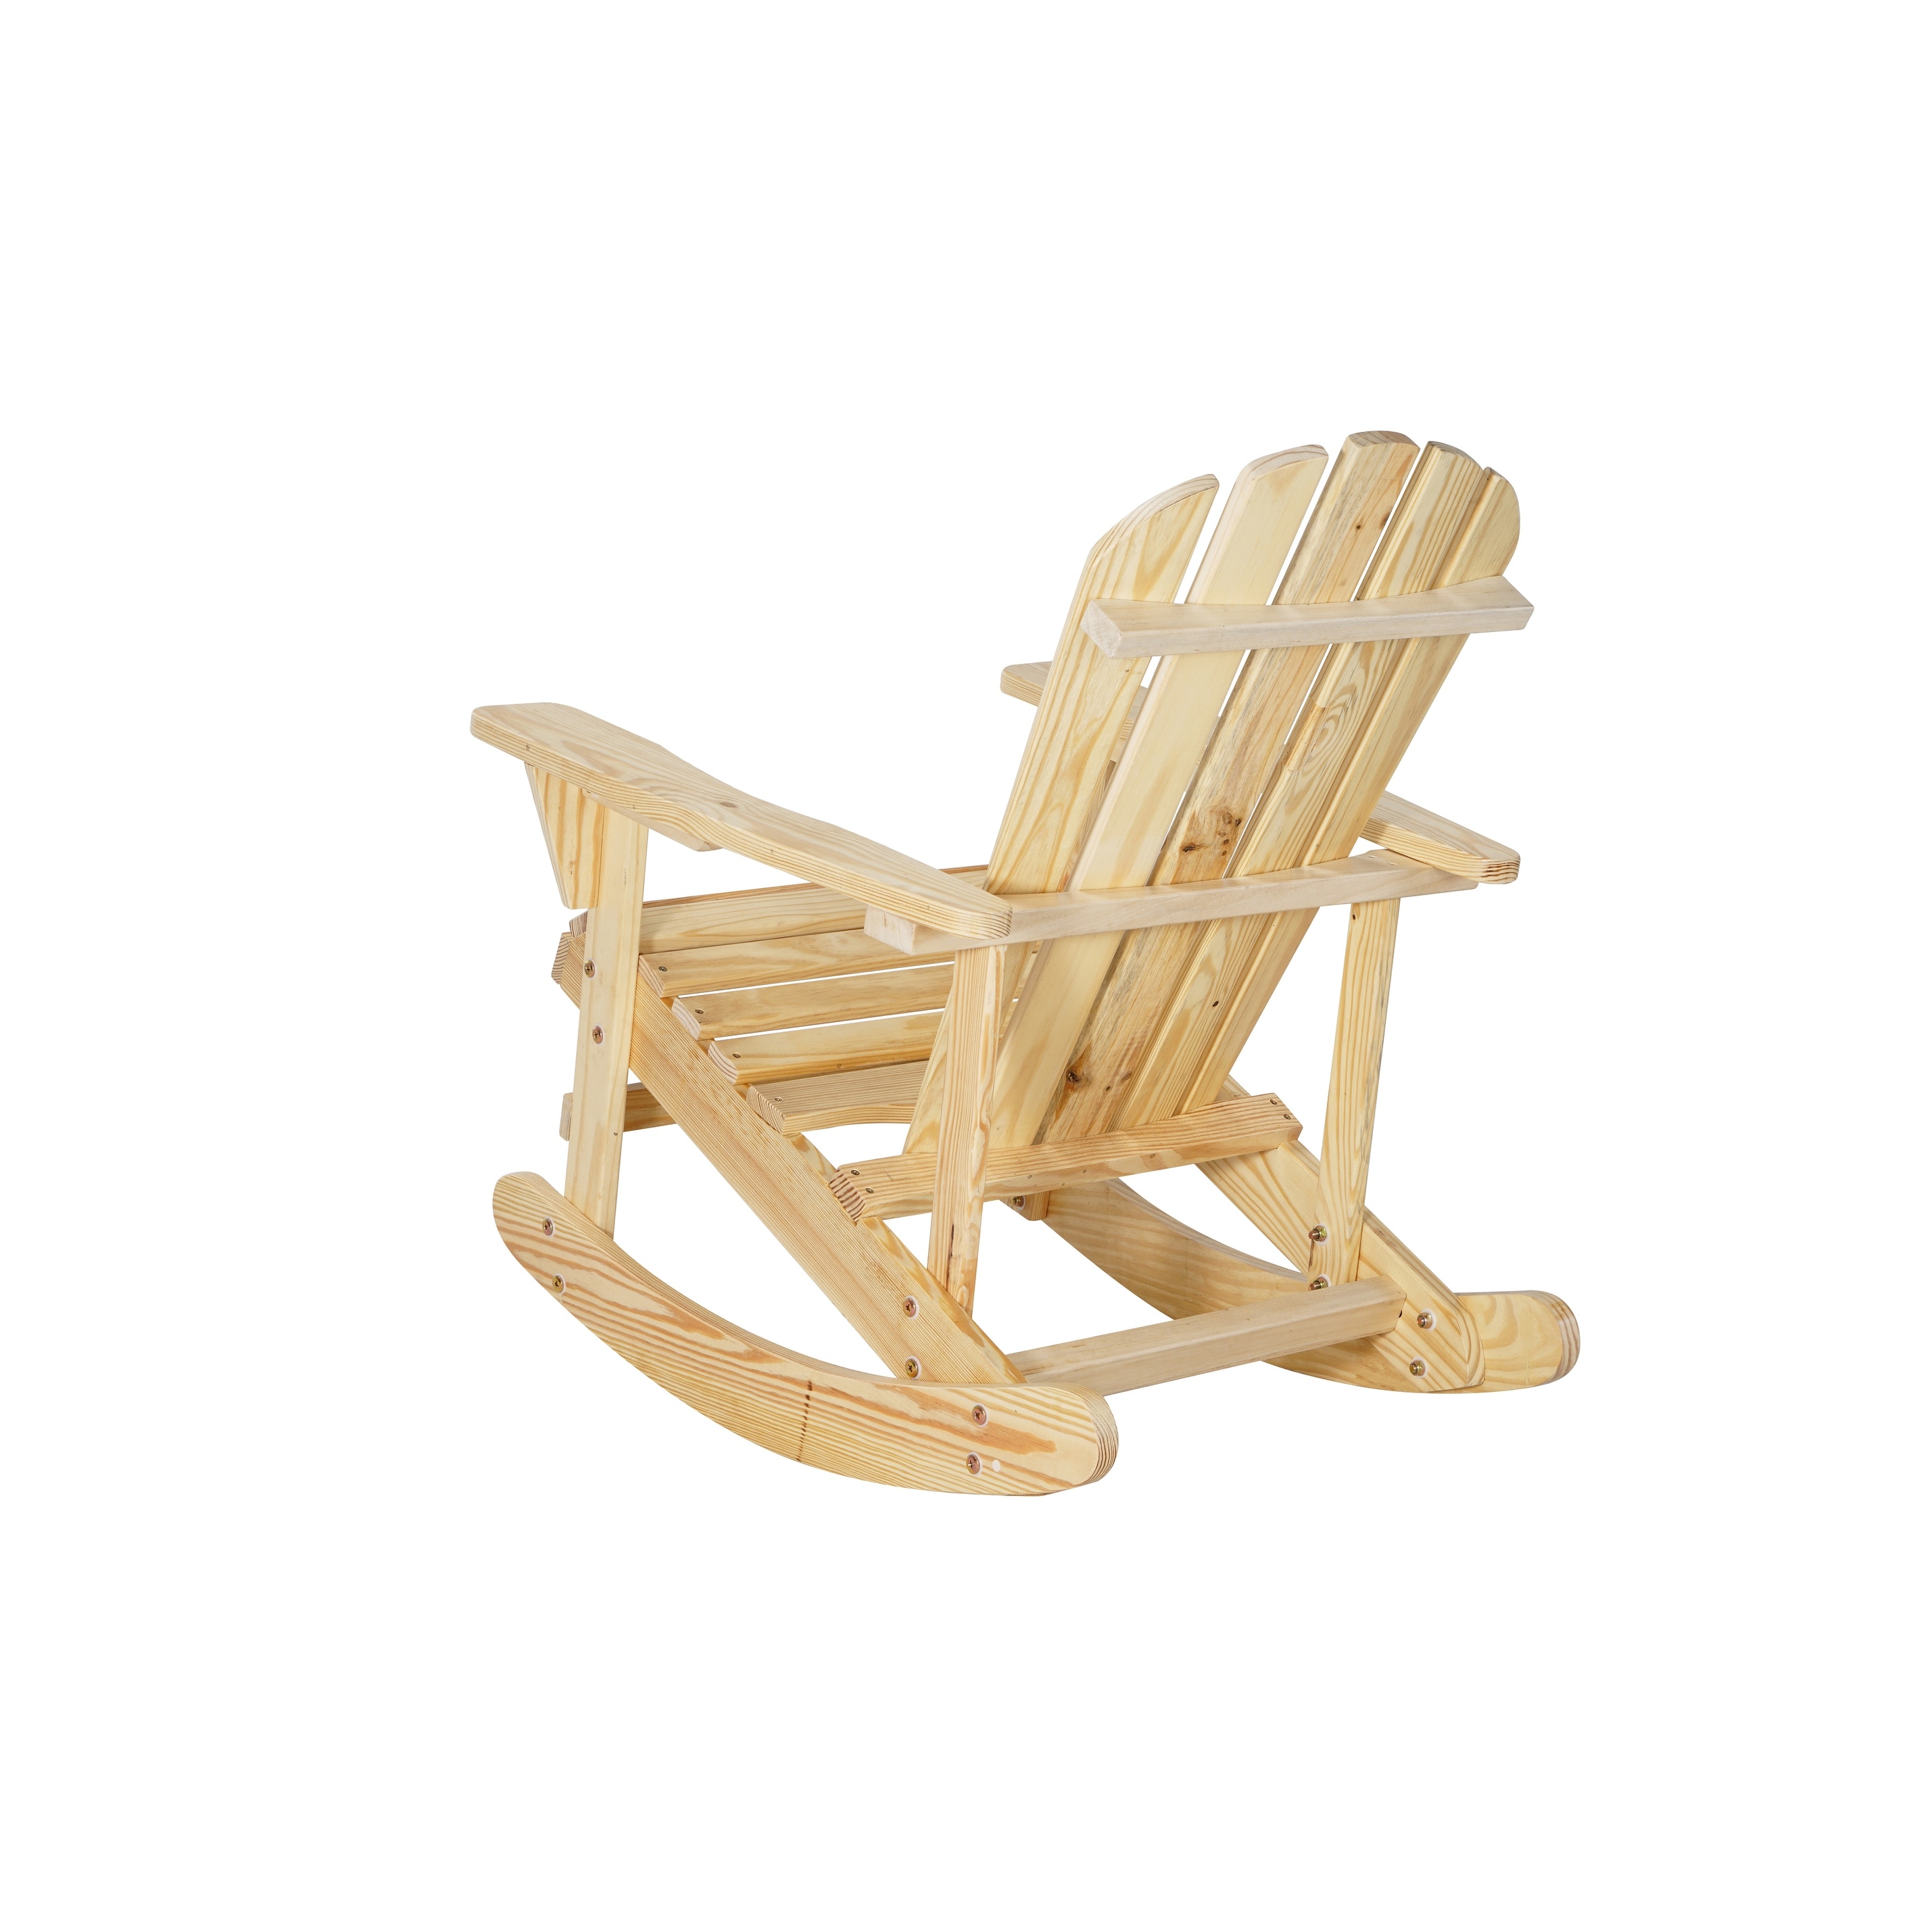 Solid Wood Adirondack Rocking Chair For Patio